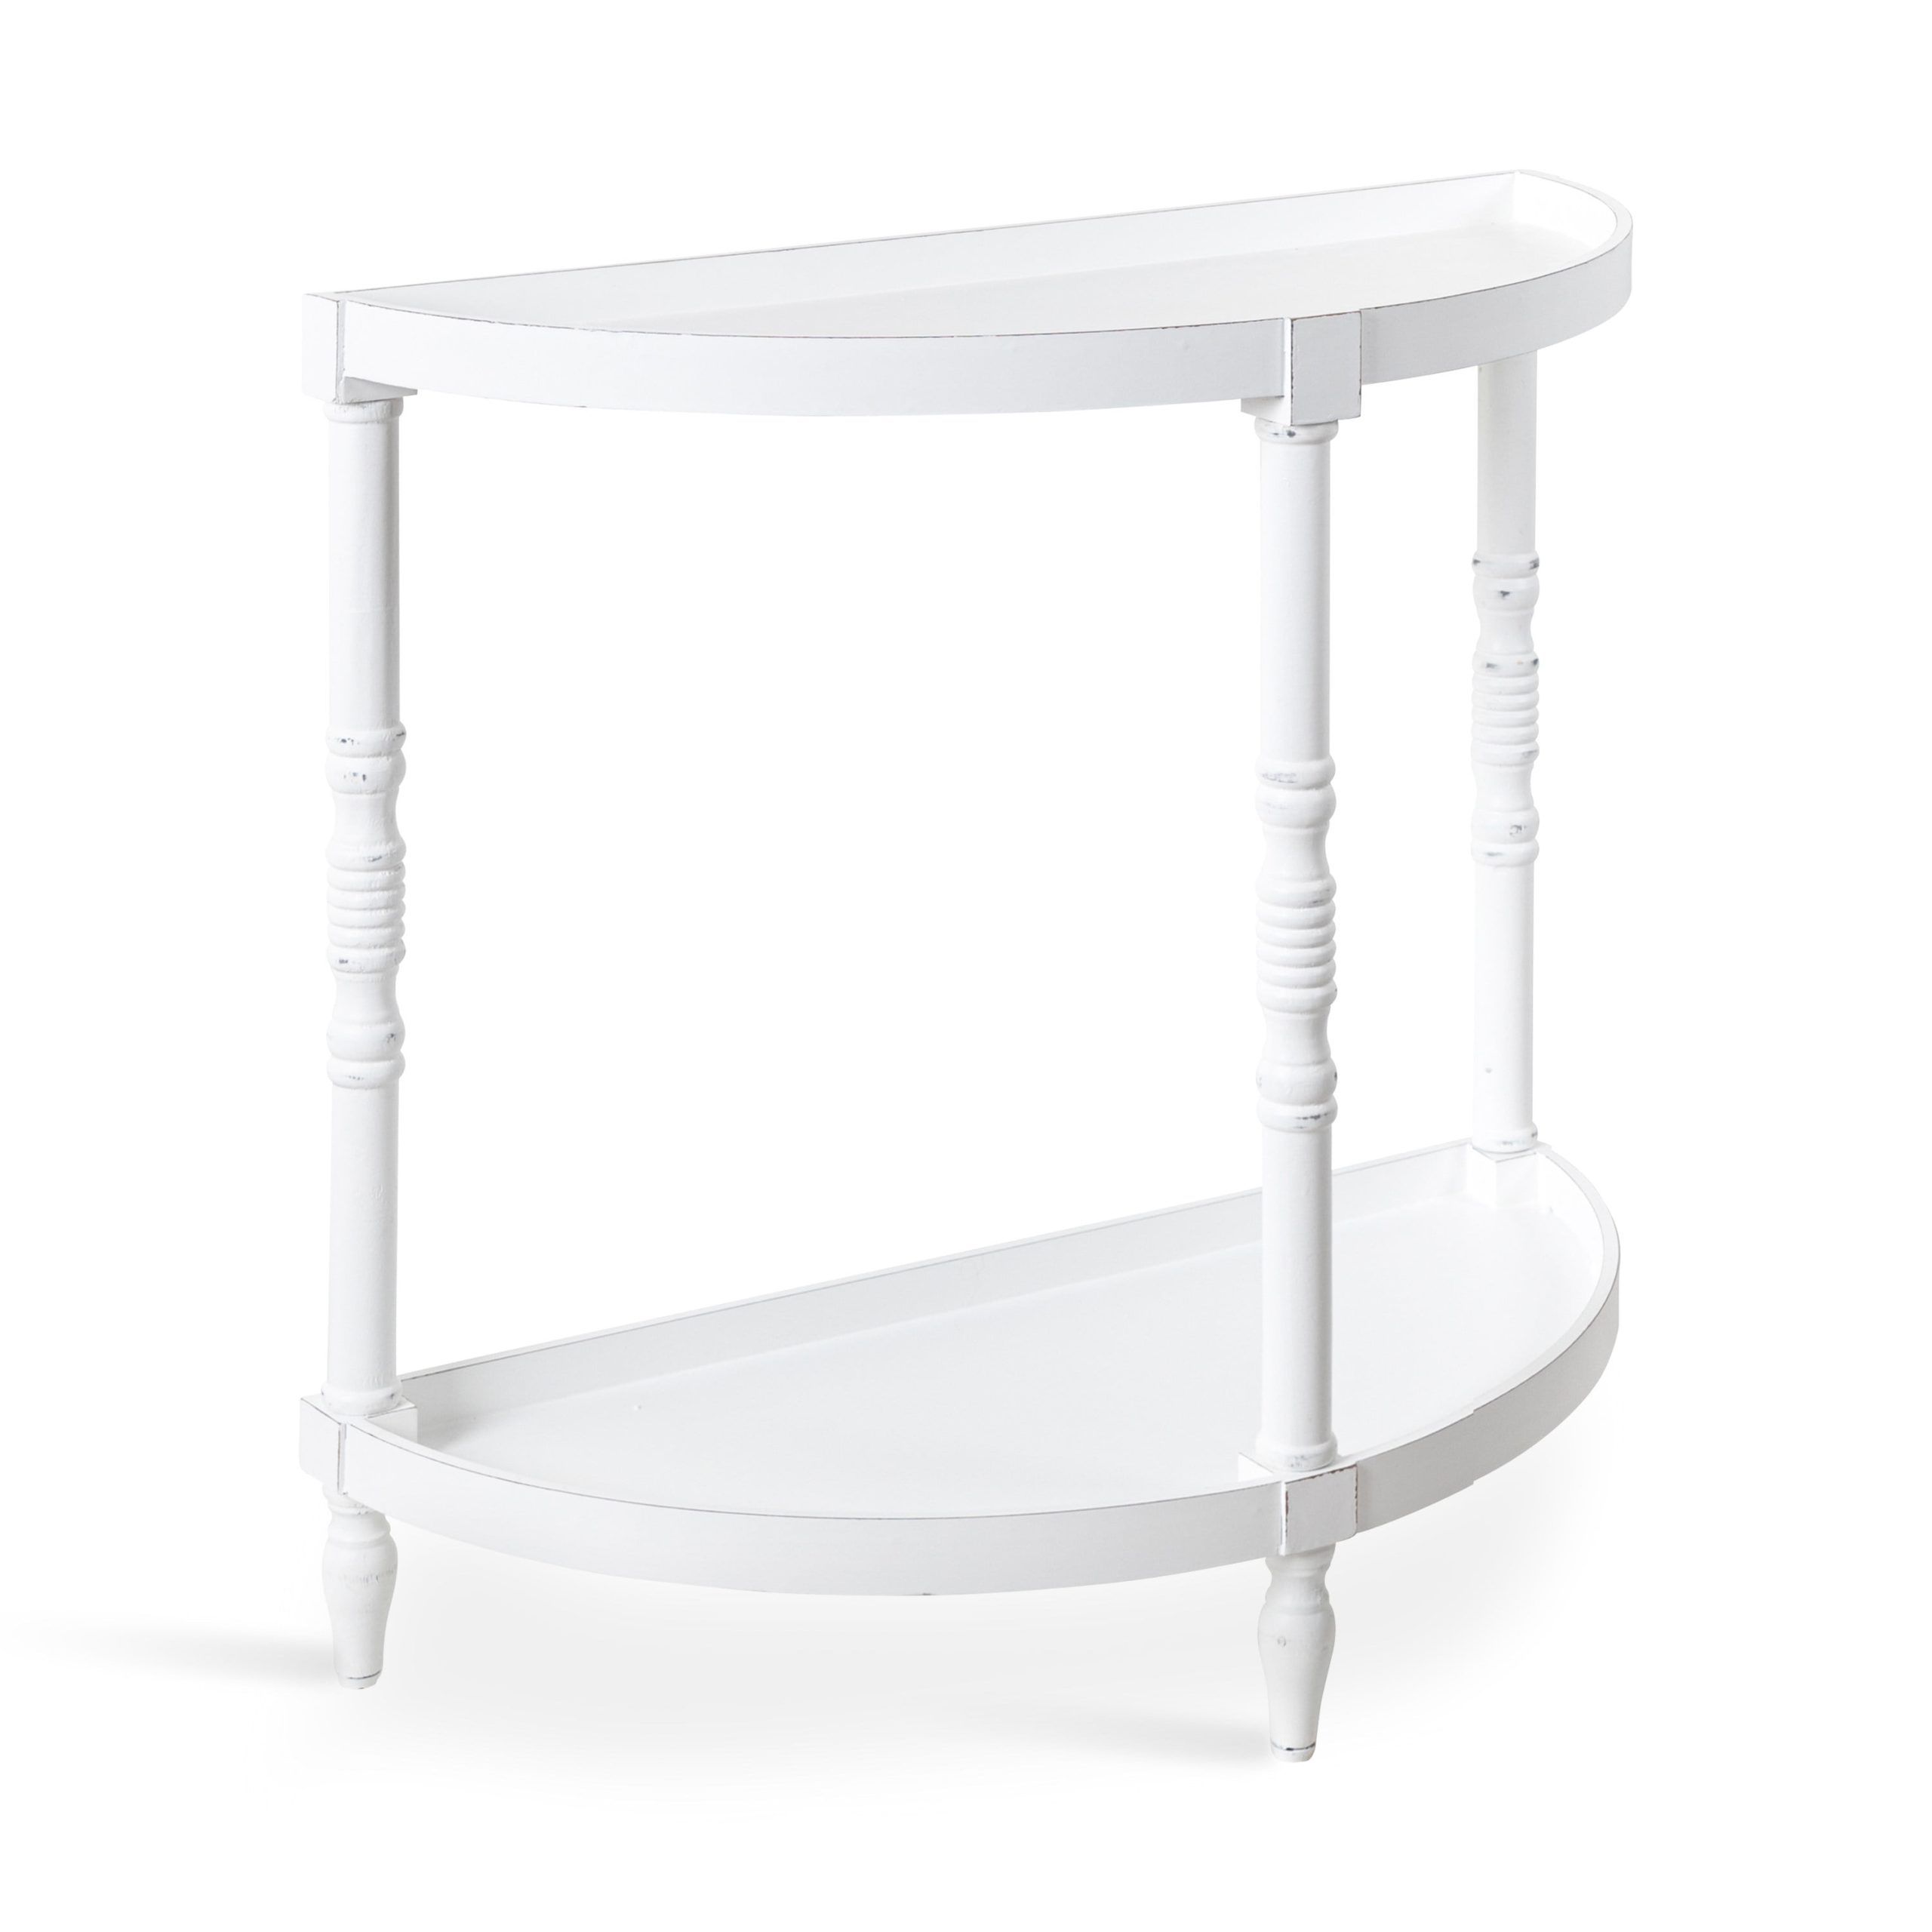 Kate And Laurel Bellport Farmhouse Demilune Console Table, 30 X 14 X 30,  White, Rustic Accent Table For Storage And Display – Walmart Pertaining To Kate And Laurel Bellport Farmhouse Drink Tables (View 4 of 15)